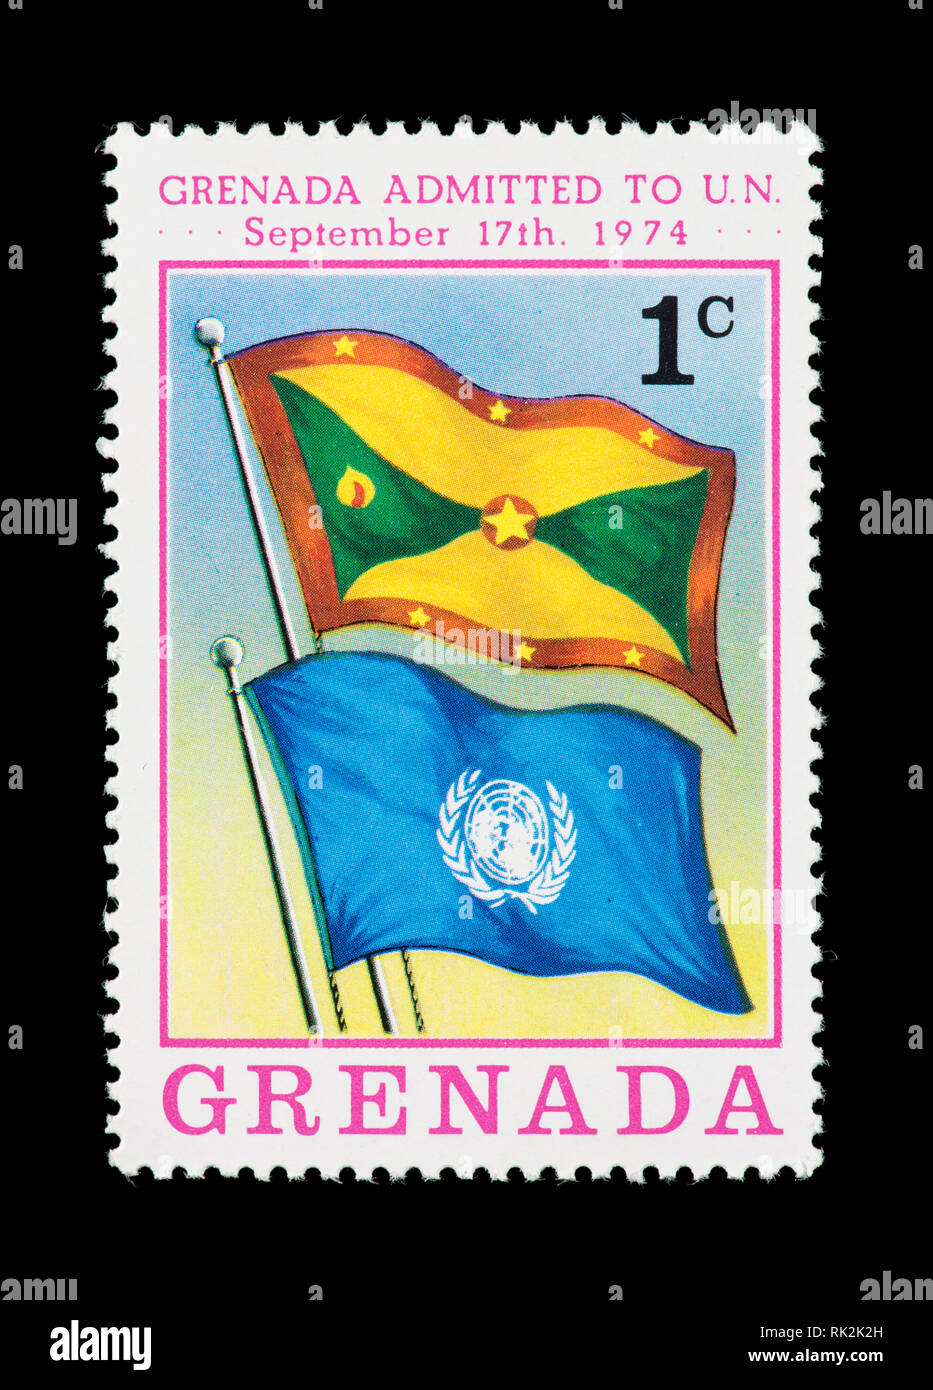 Postage stamp from Grenada depicting the Granada and United Nations flags, admission to the UN in 1974. Stock Photo